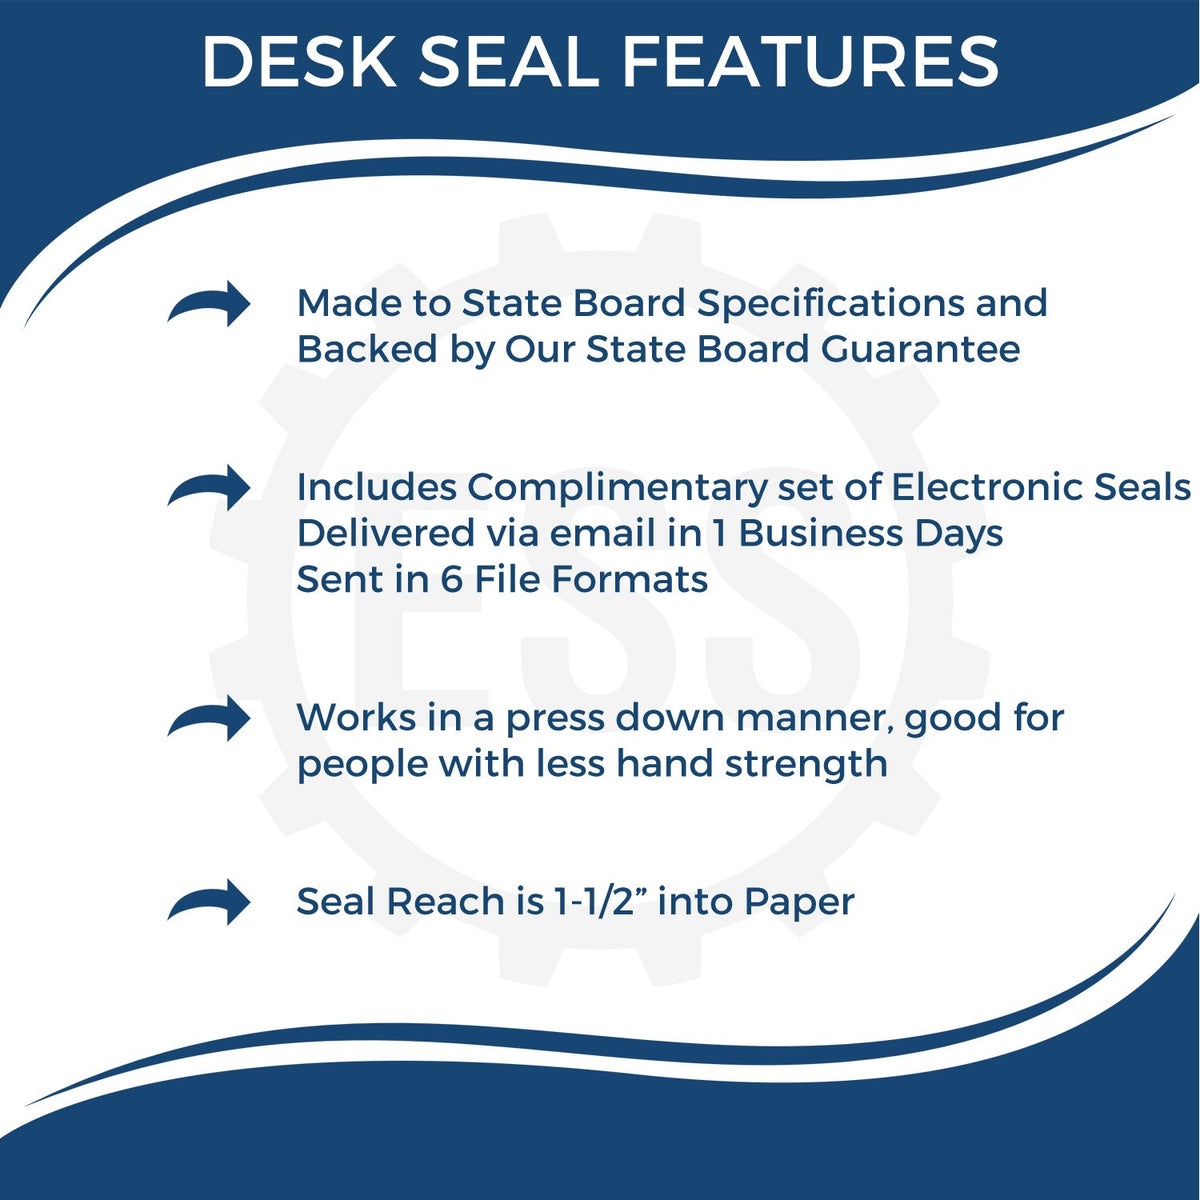 A picture of an infographic highlighting the selling points for the Idaho Engineer Desk Seal